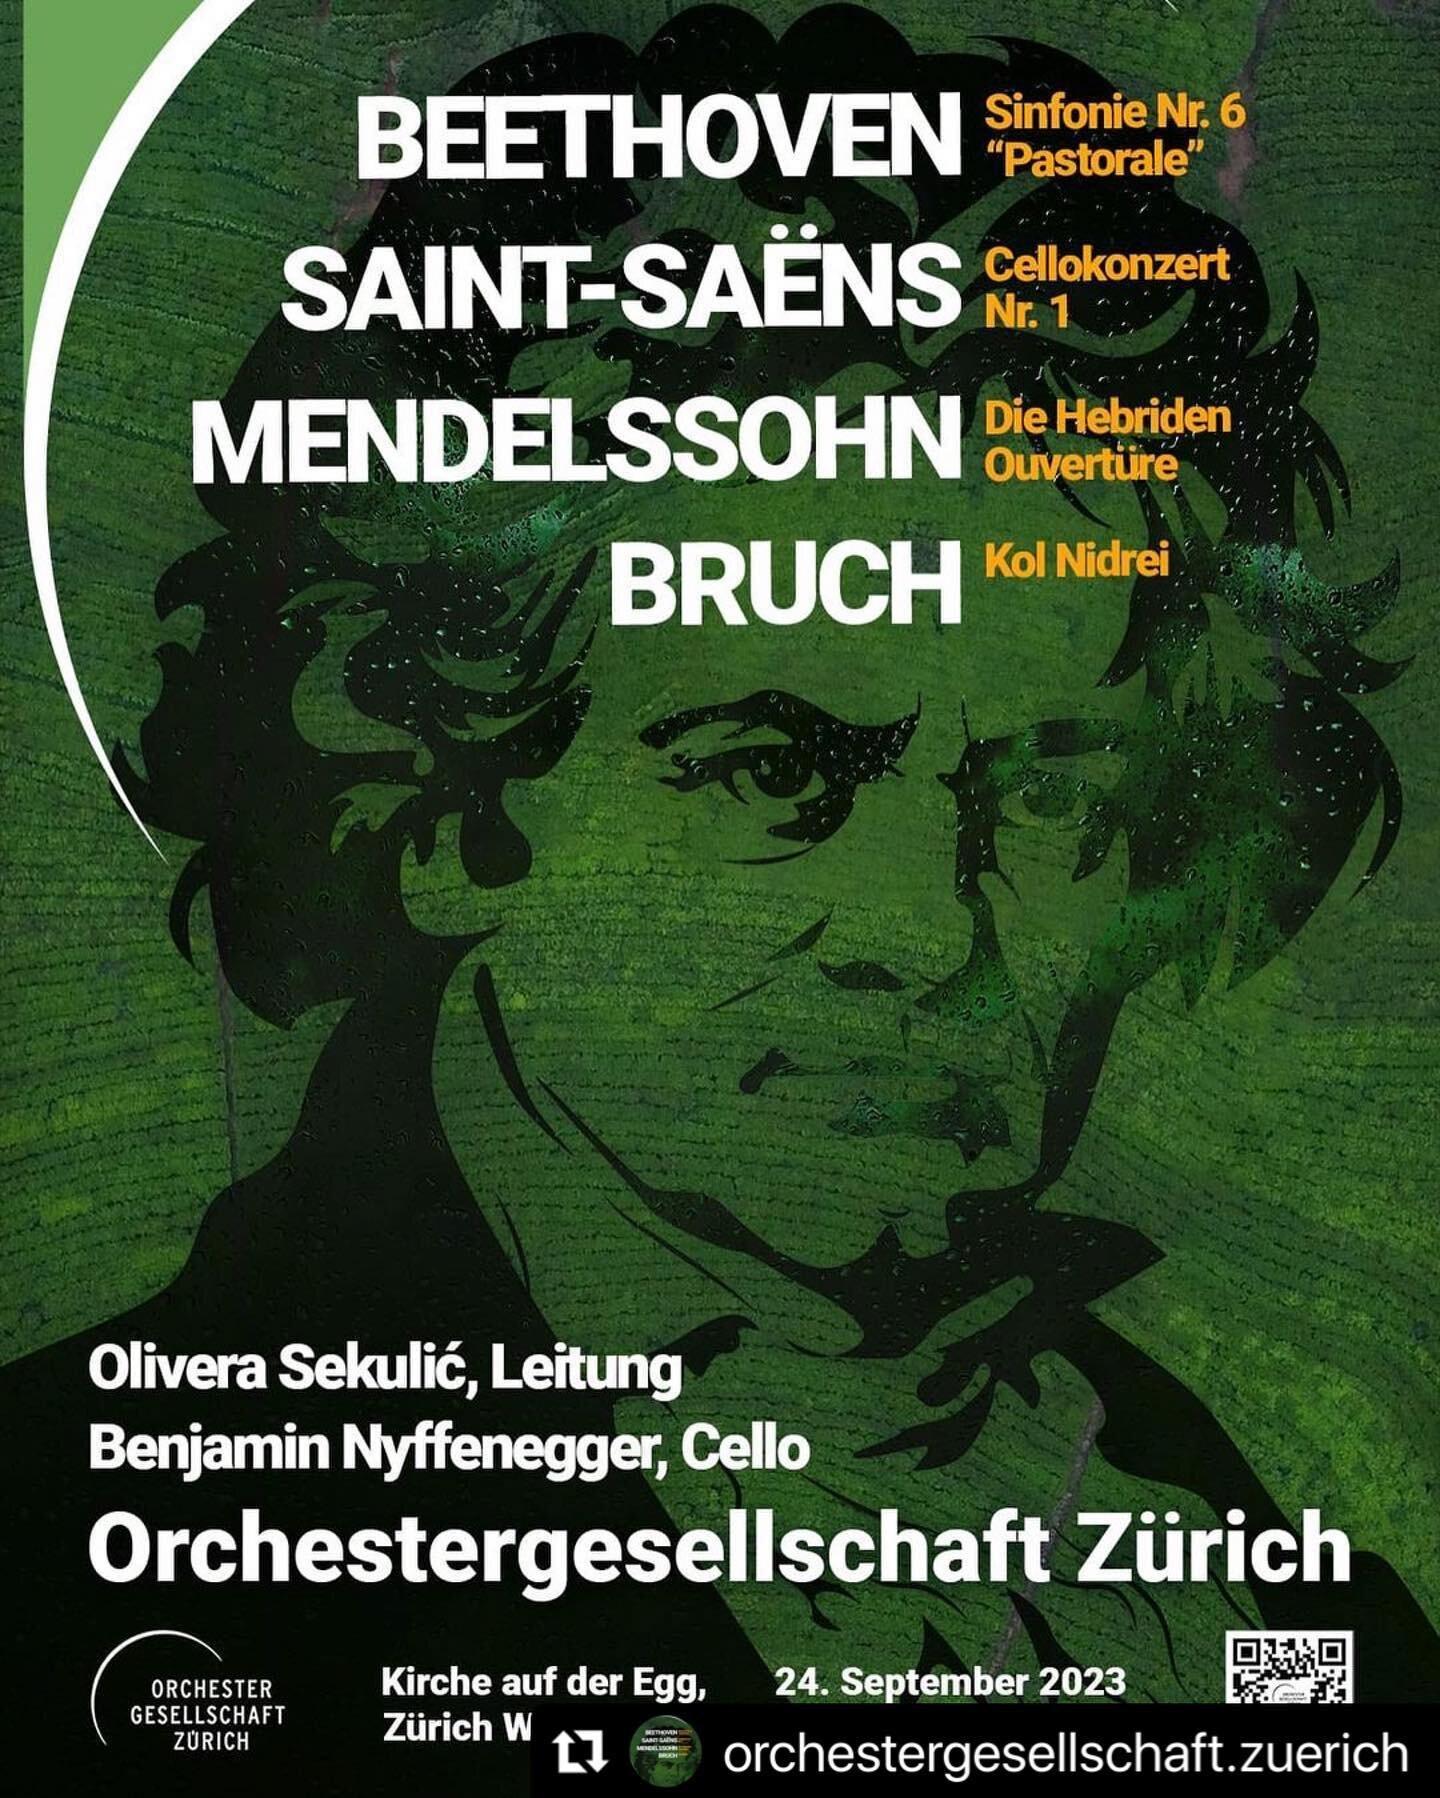 🍂looking forward to our next concert with @orchestergesellschaft.zuerich on September 24th in Zurich, playing Beethoven&rsquo;s Pastorale Symphony, Mendelssohn&rsquo;s The Hebrides Overture and Saint Saens cello concerto with the fantastic @nyffeneg